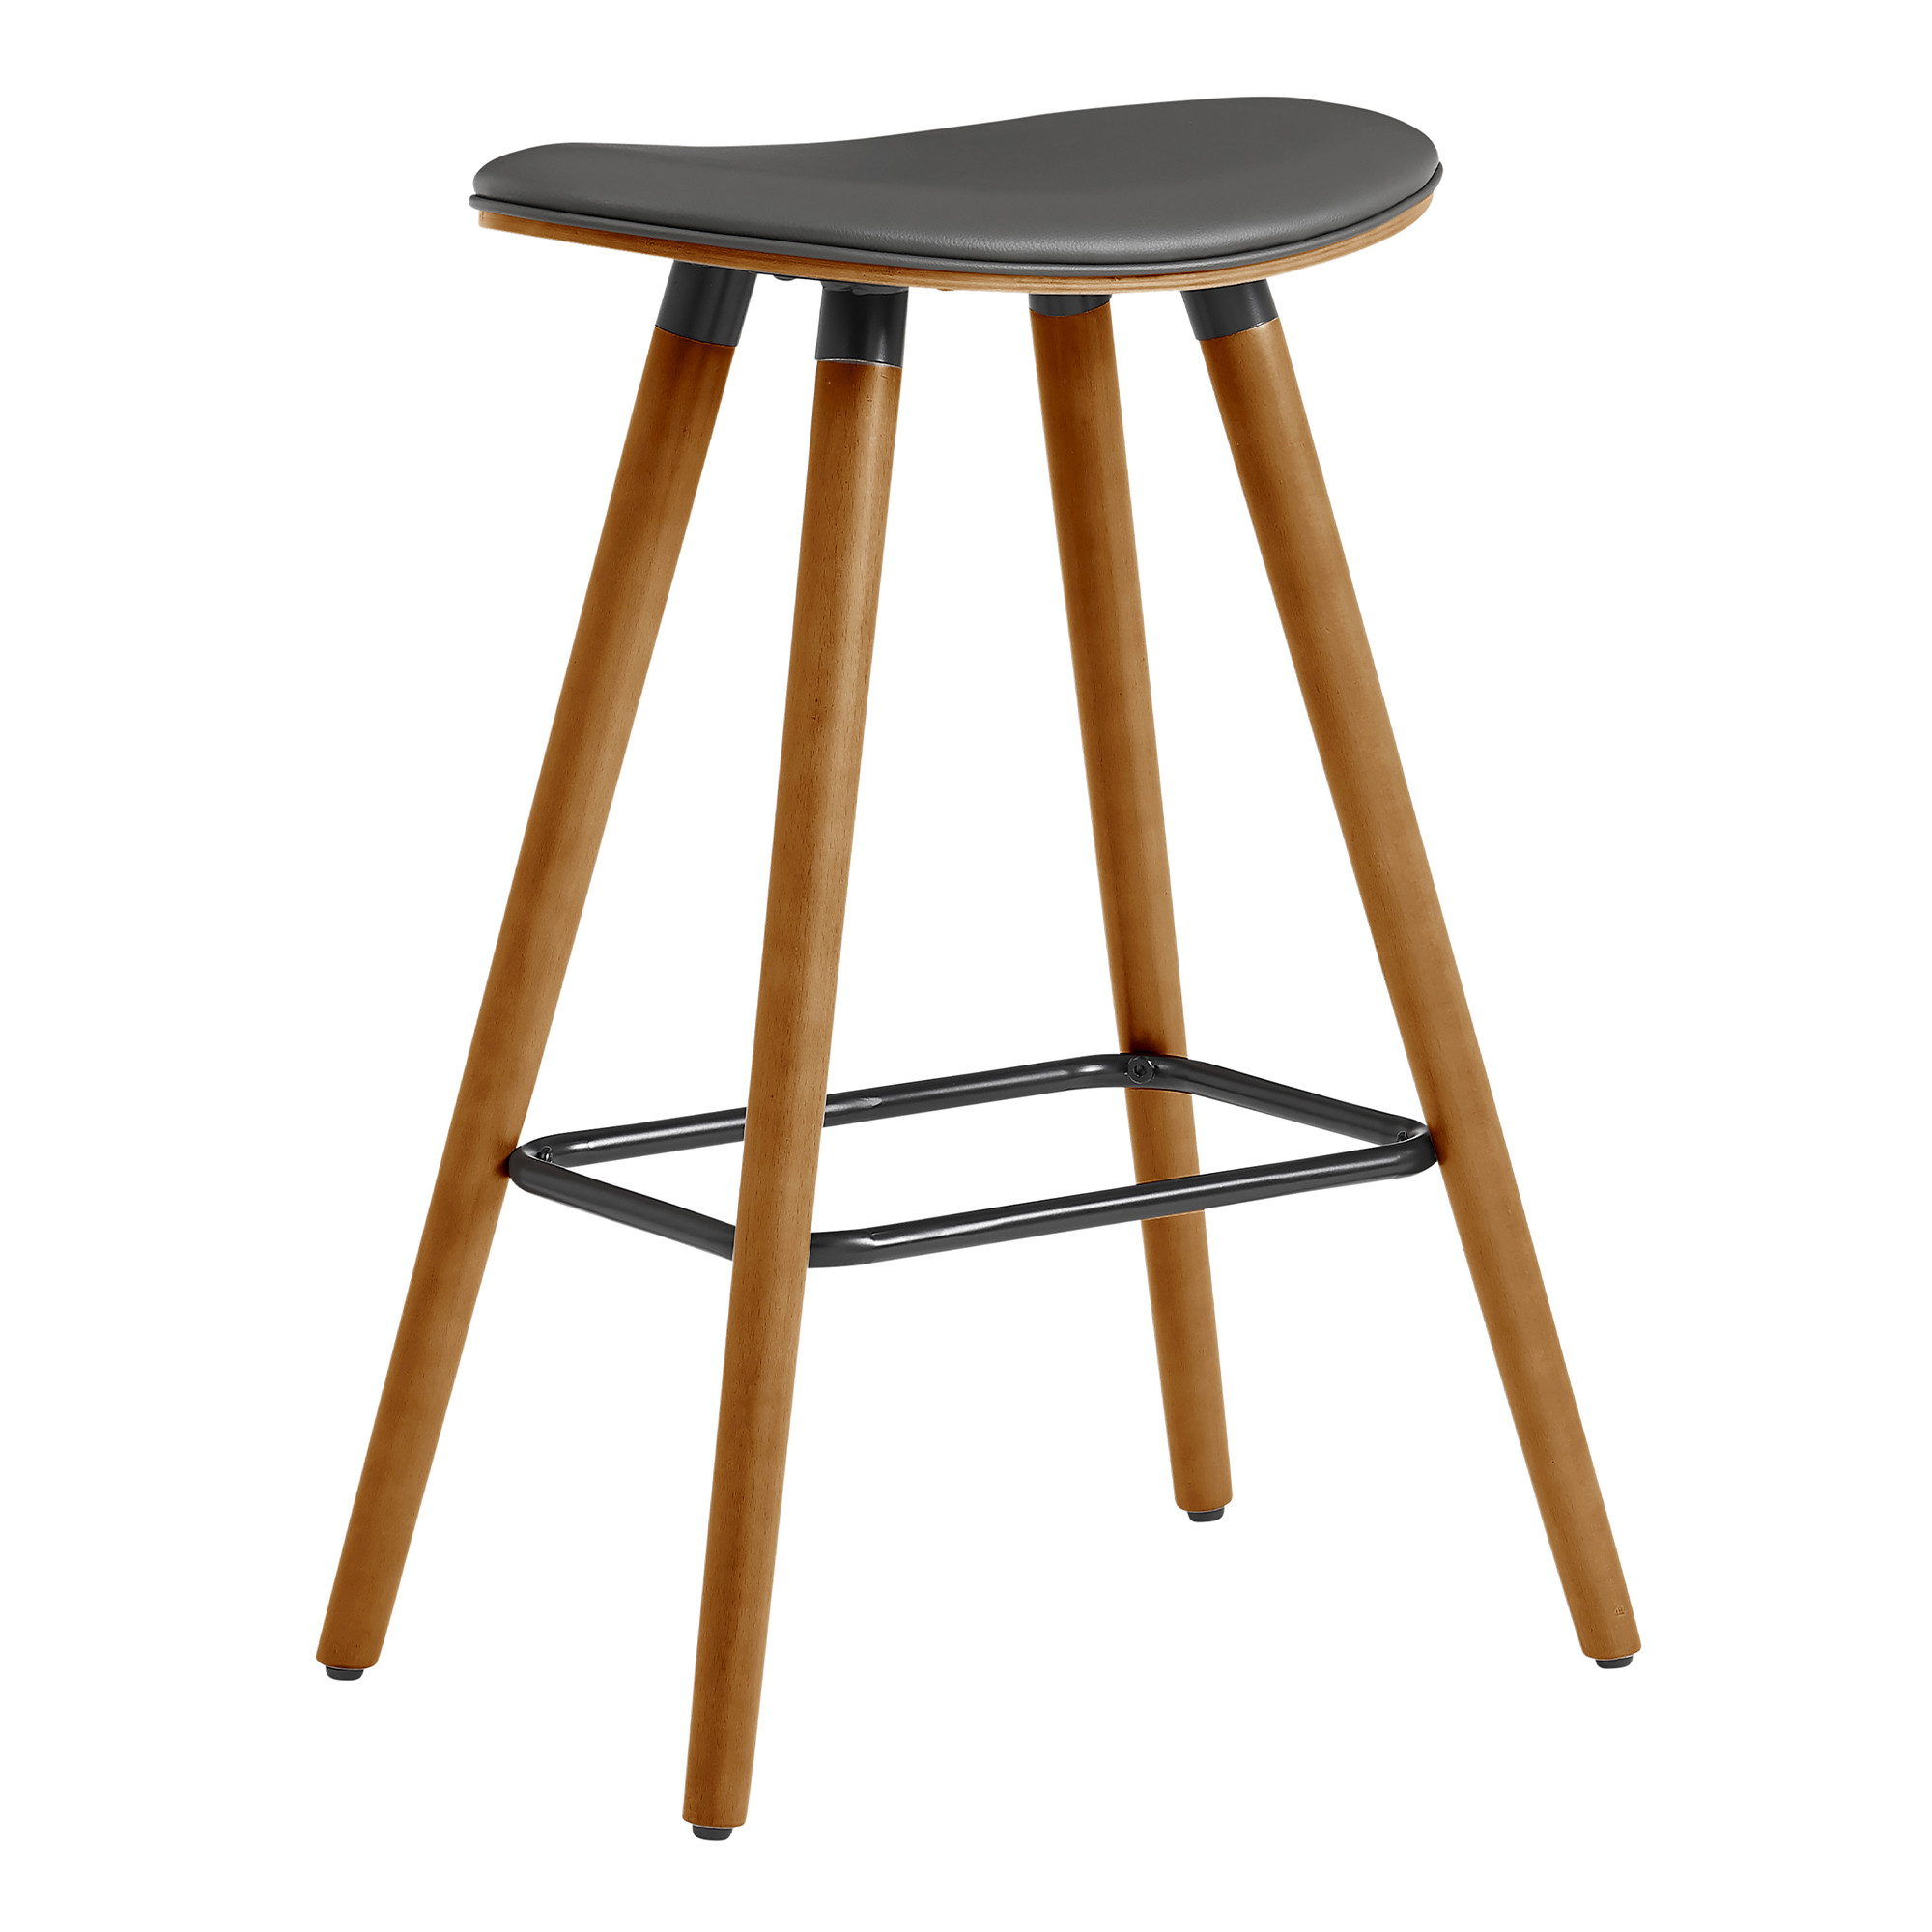 26" Gray Faux Leather Backless Wooden Bar Stool